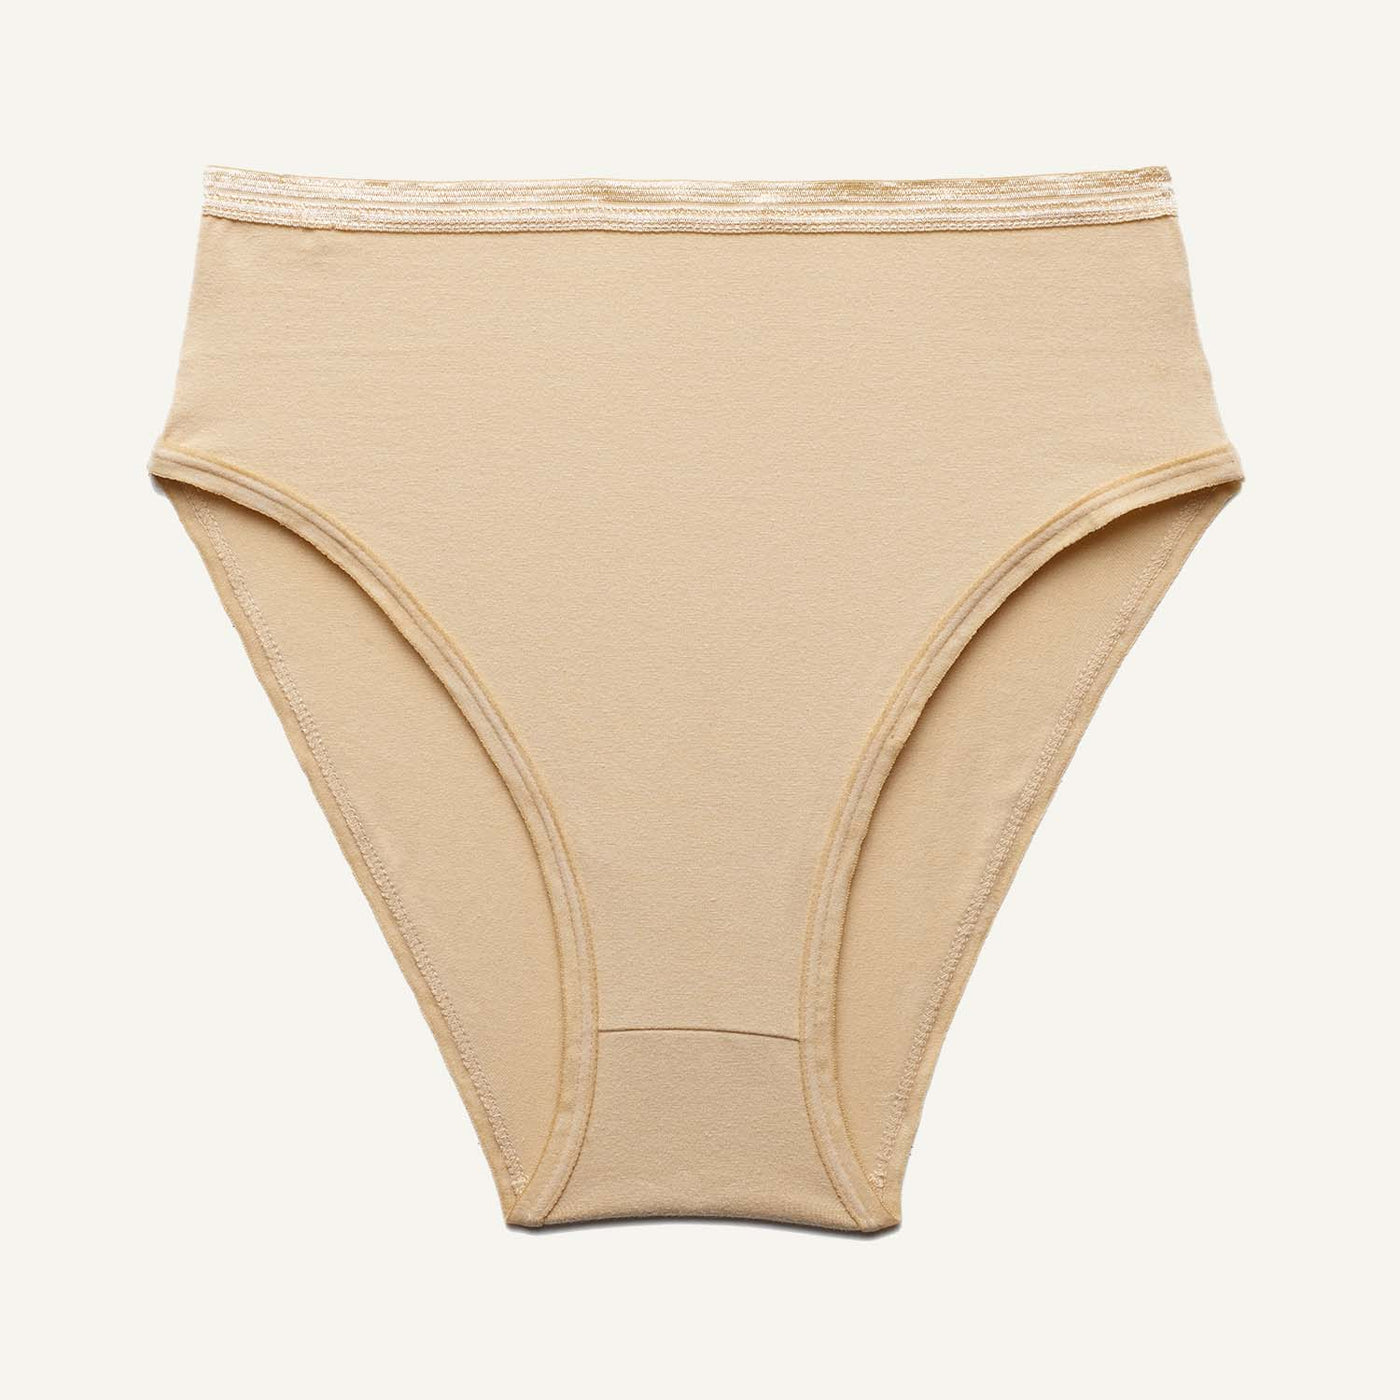 Subset Organic Cotton Women's High-Rise Brief: In sizes 2XS-4XL